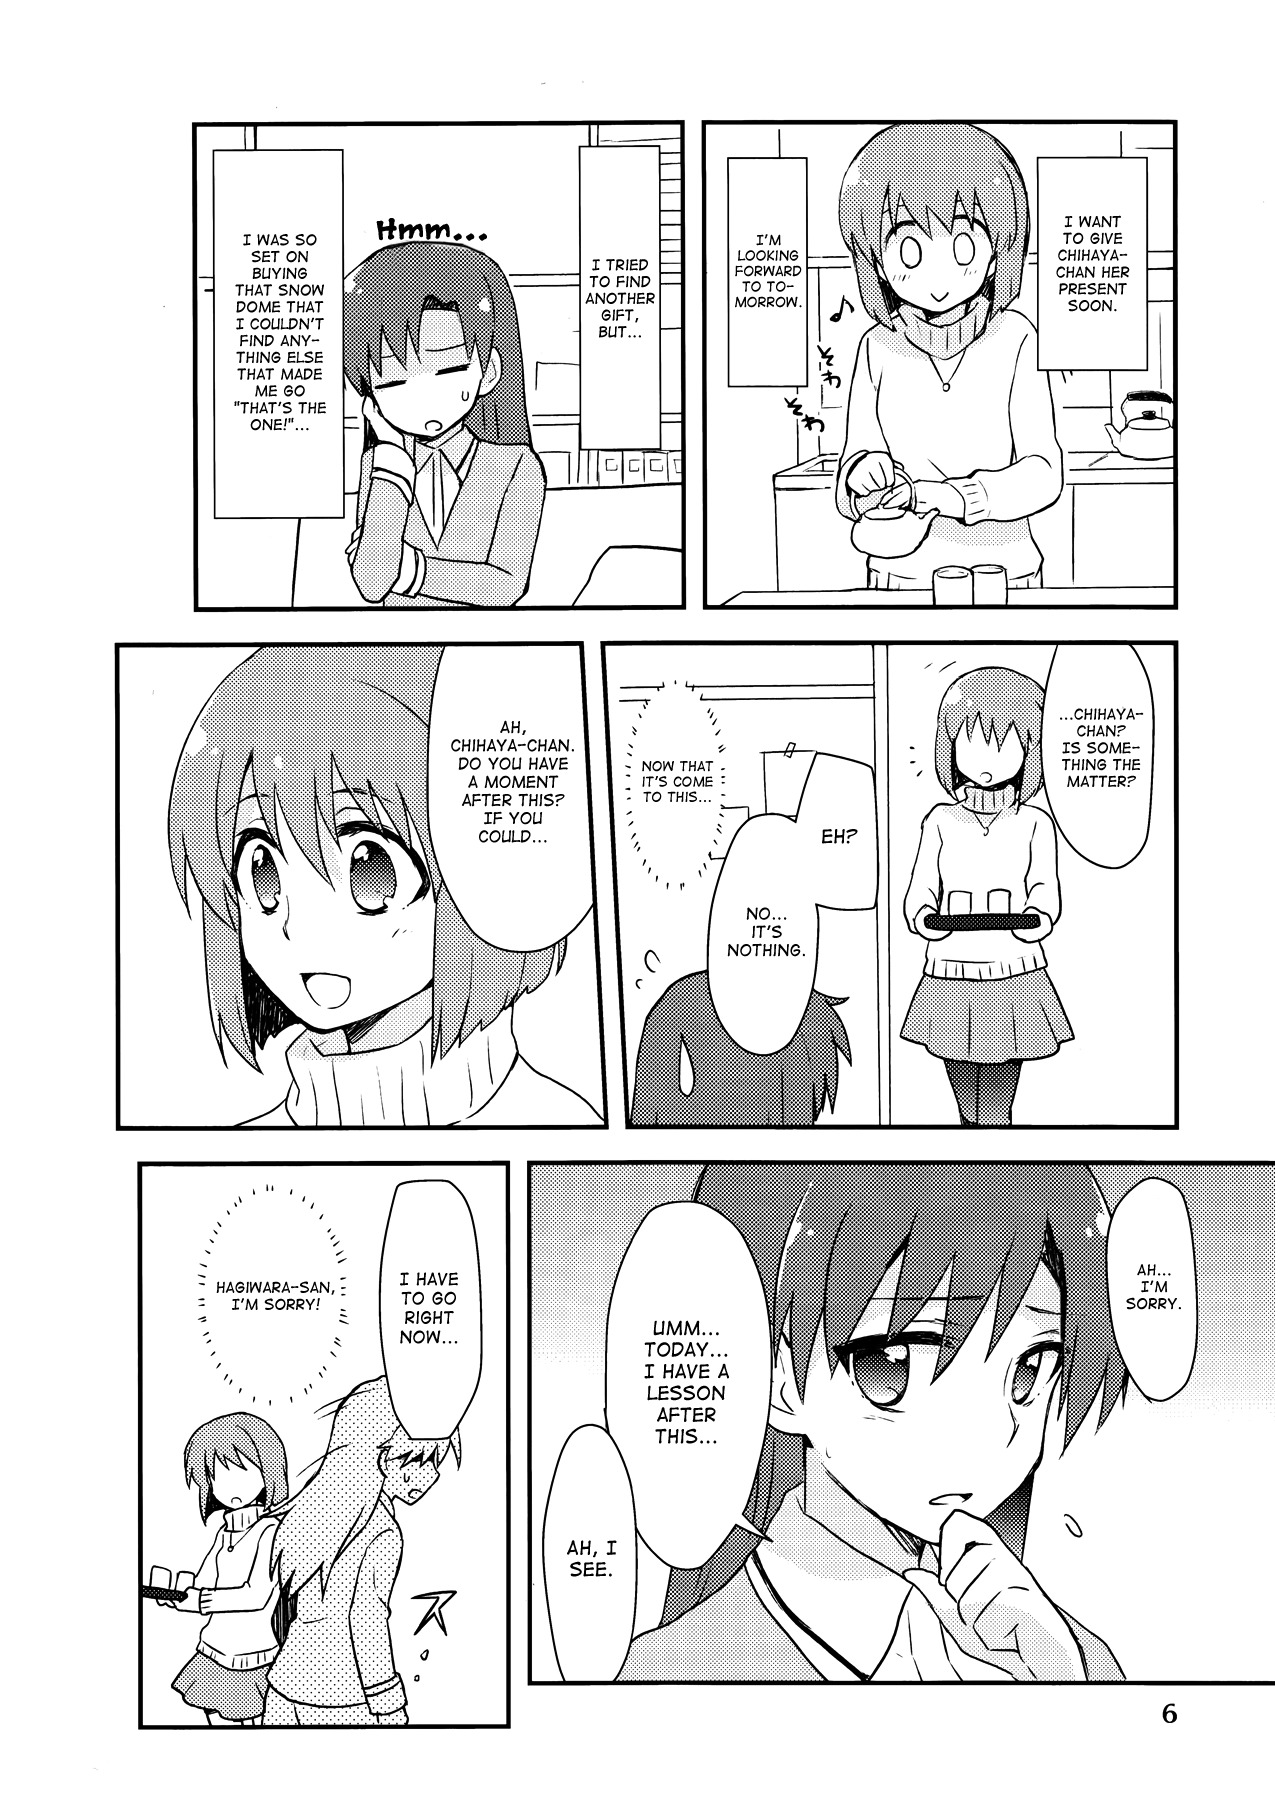 THE iDOLM@STER - Inside the Snow Dome (Doujinshi) Oneshot